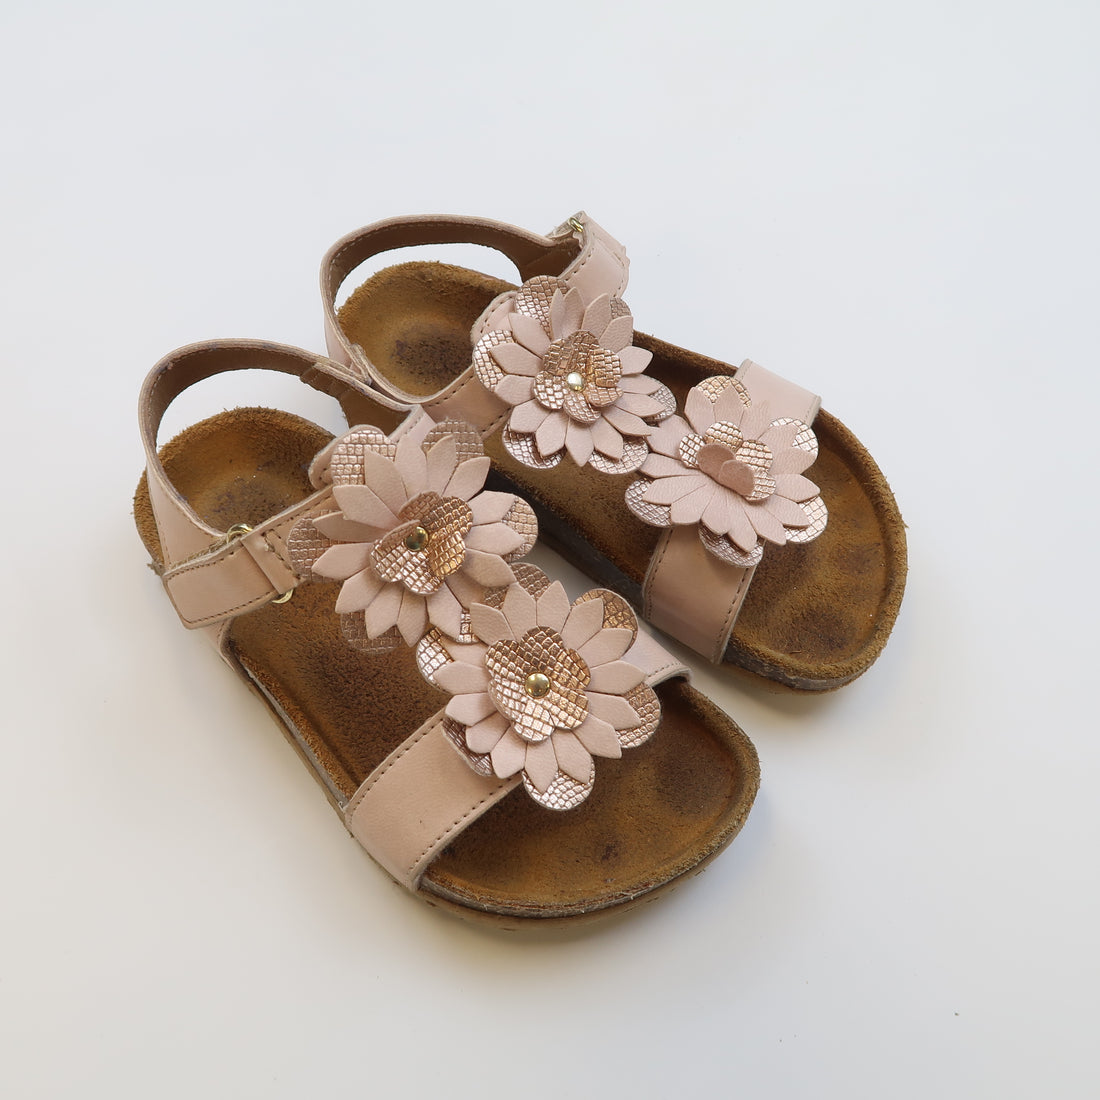 Unknown Brand - Sandals (Shoes - 10/11)